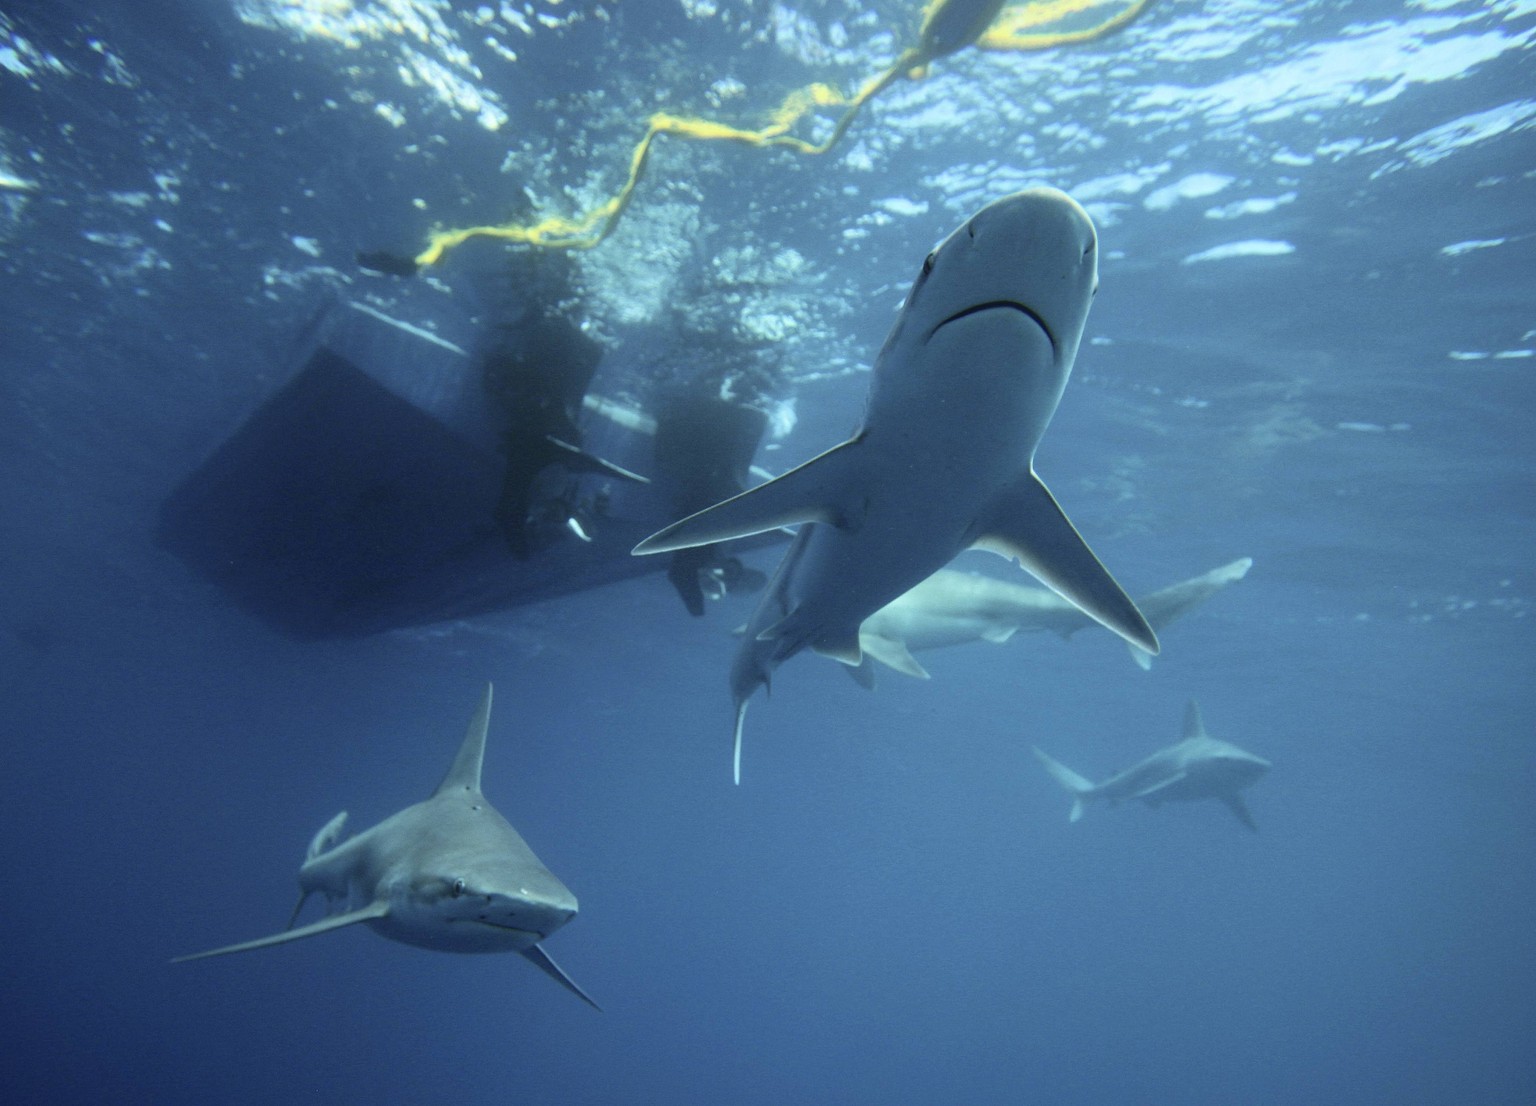 Sandbar sharks swim around during a cageless shark dive tour in Haleiwa, Hawaii February 16, 2015. Shark tours are a renowned form of eco-tourism in Hawaii and diving with sharks without a cage is bec ...